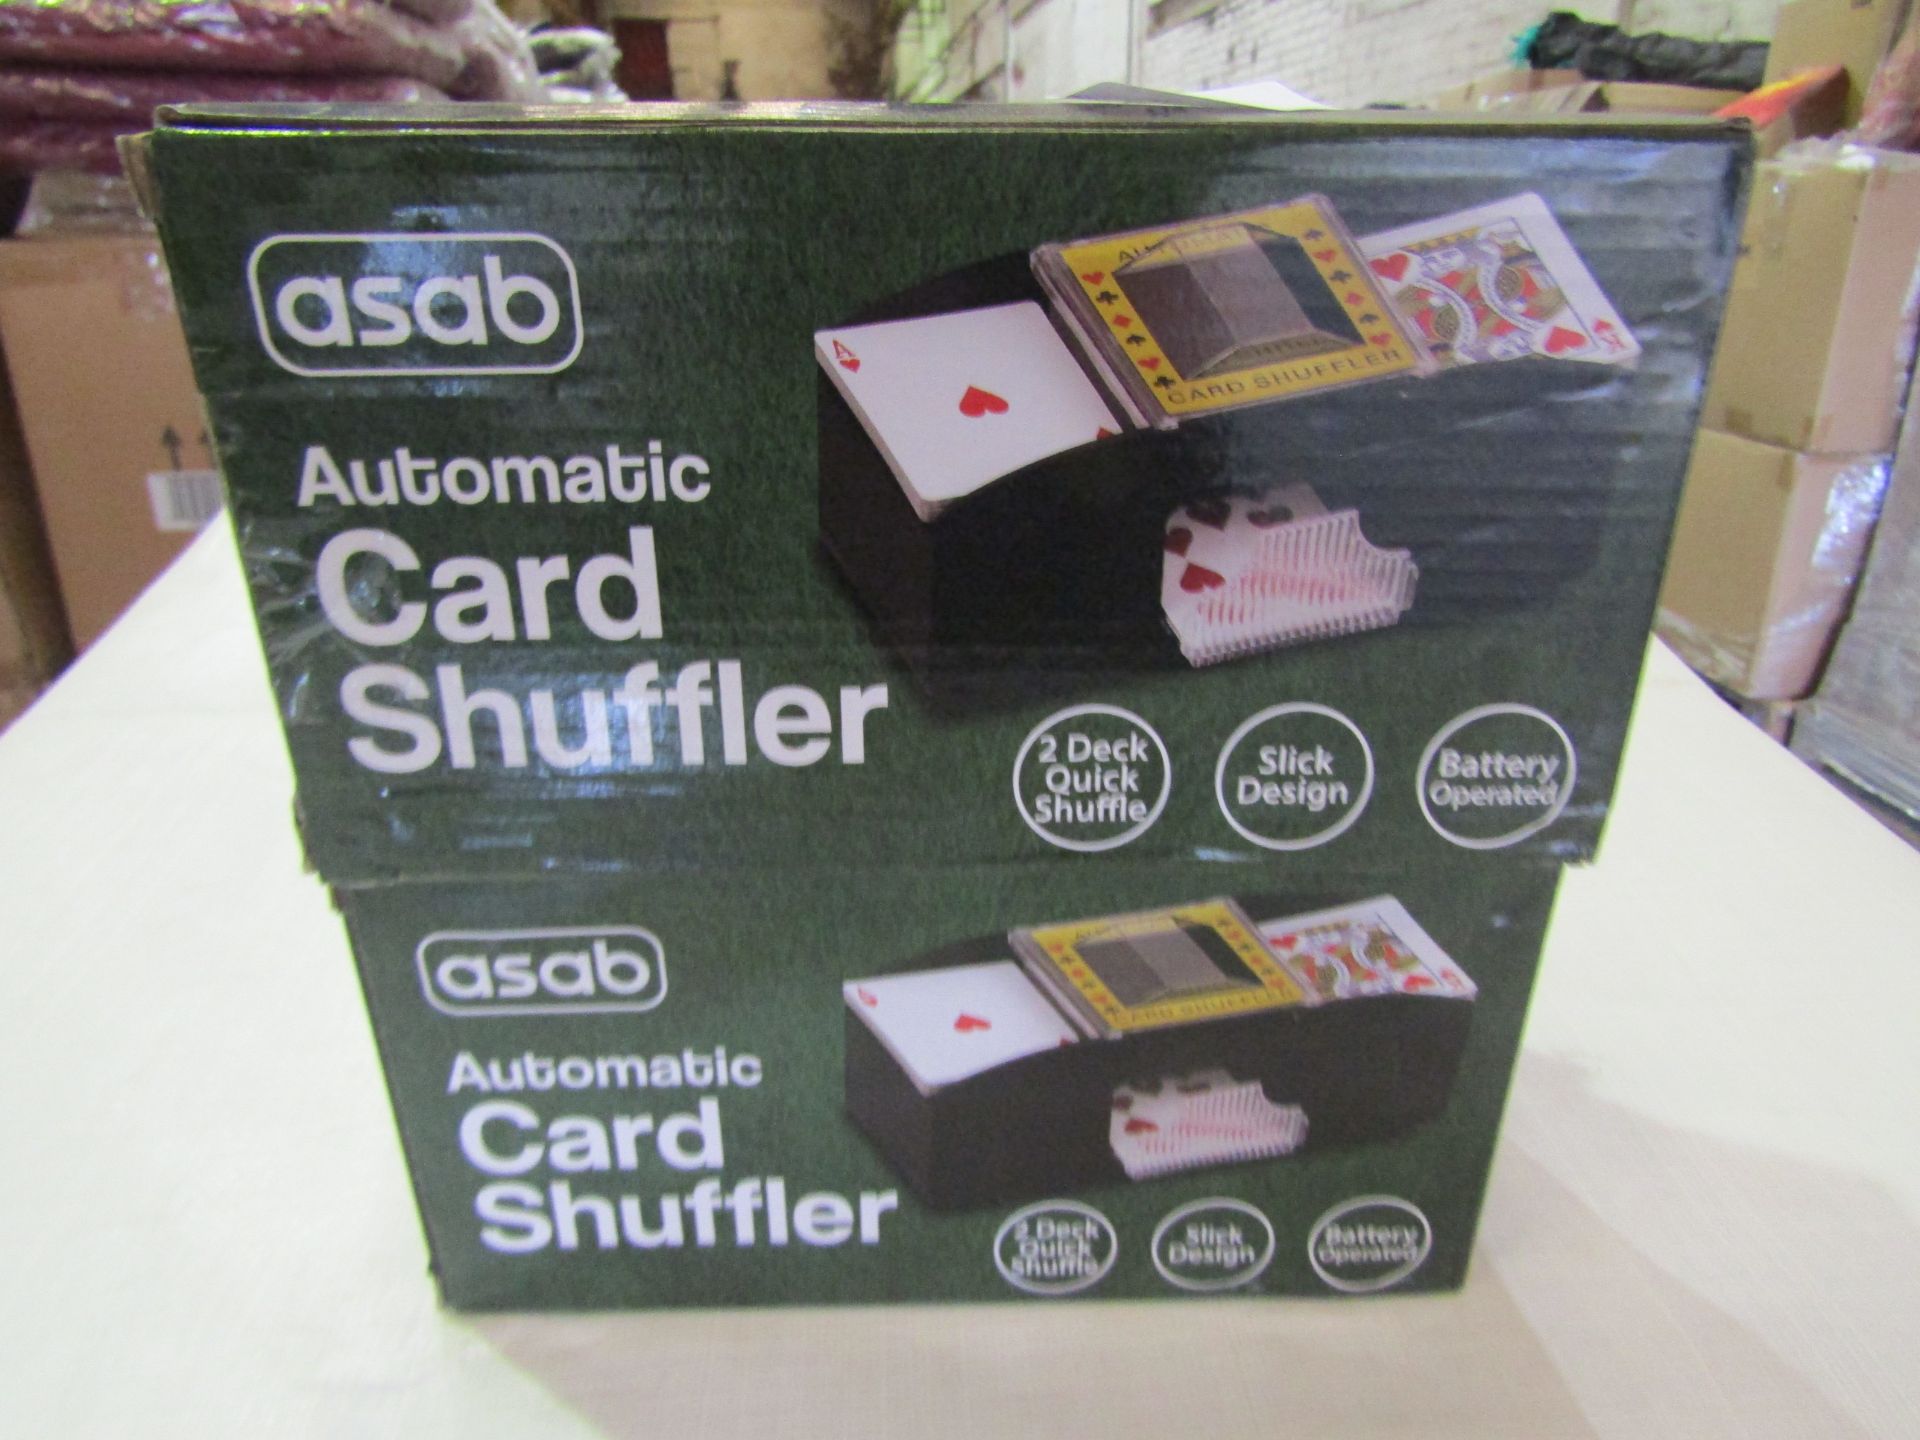 2x Asab Automatic Card Shuffler, Battery Operated - Both Unchecked & Boxed.